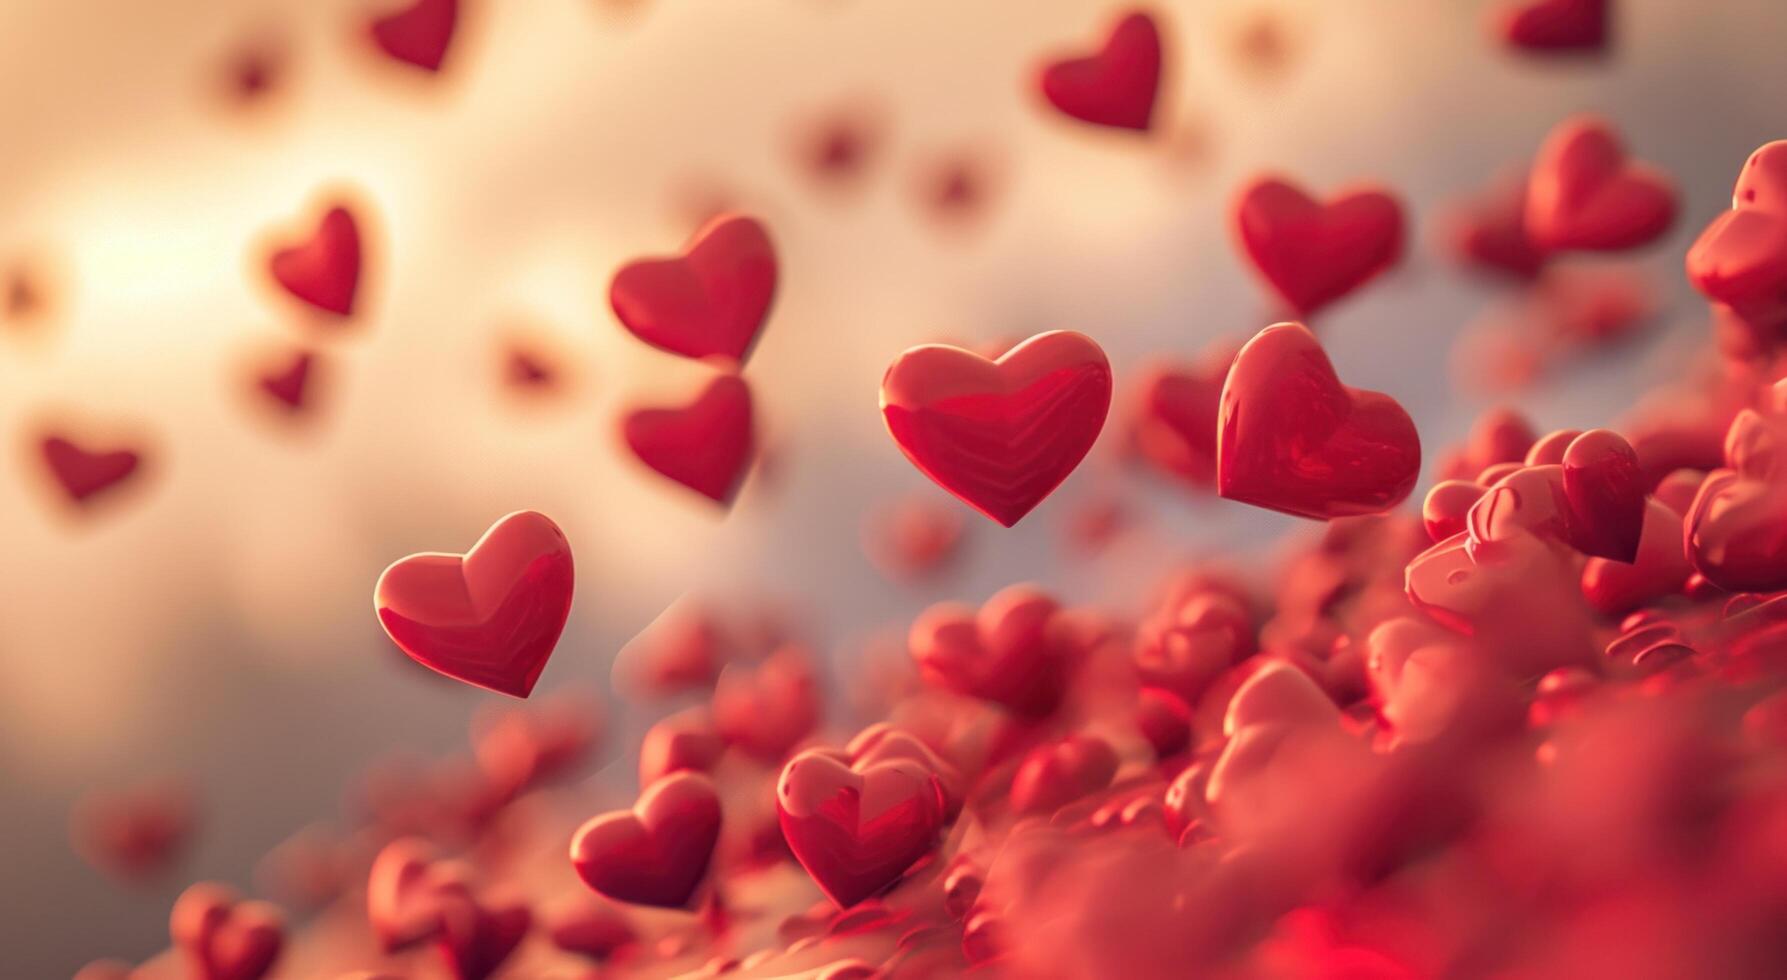 AI generated red paper hearts are sitting on white table background photo